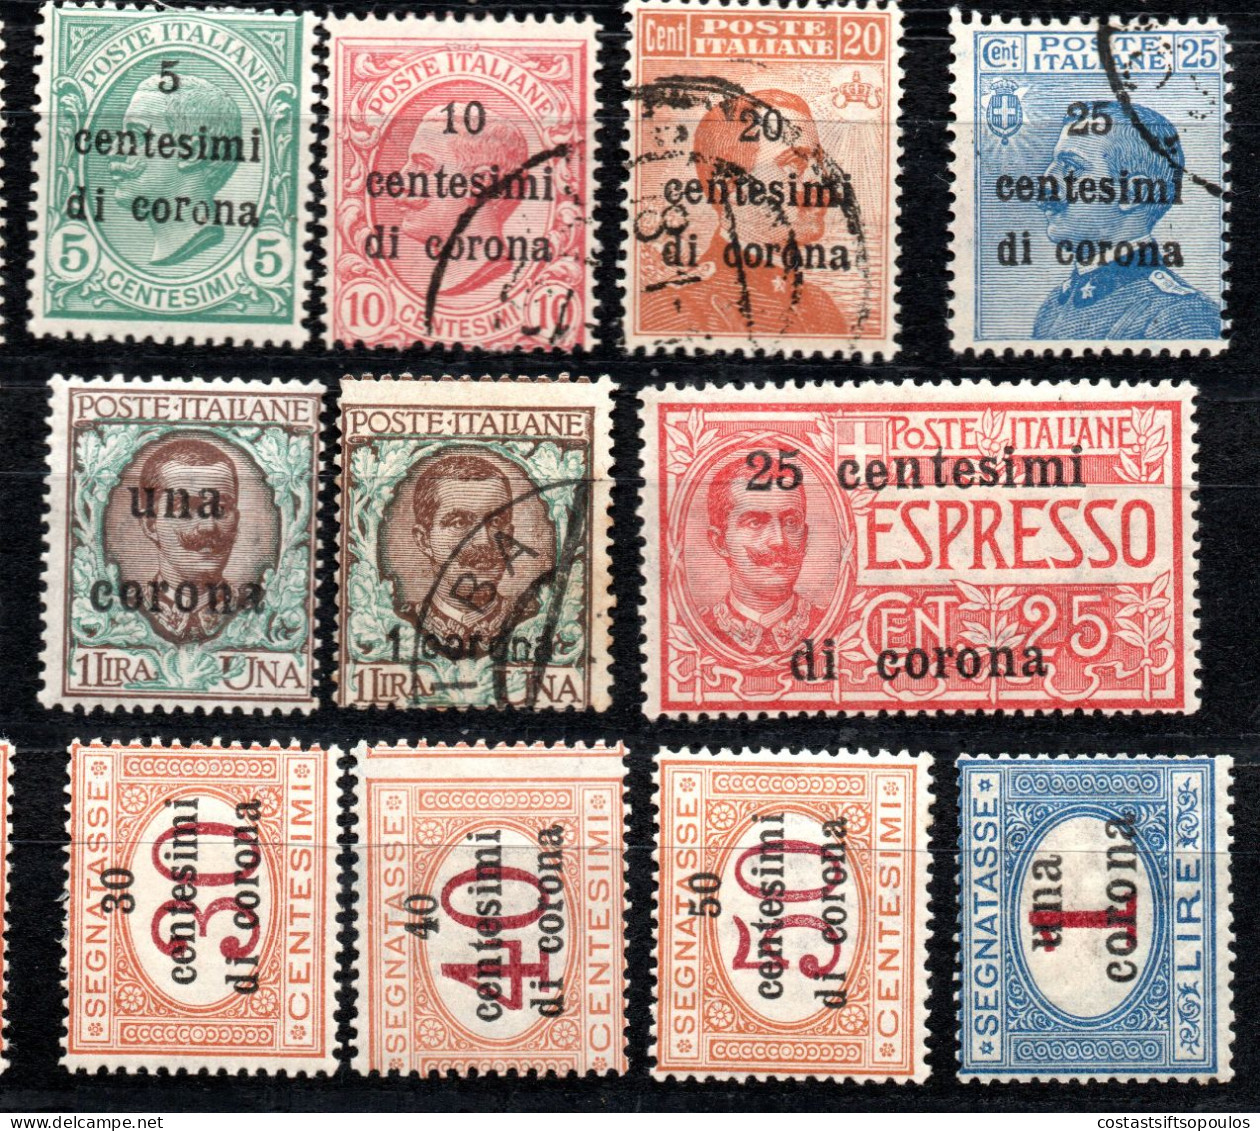 2145.AUSTRIA. ITALY. TRENTINO 1919-1920 41 ST. LOT.POSSIBLY SOME NOT GENUINE. GENERALLY GOOD CONDITION - Oostenrijkse Bezetting